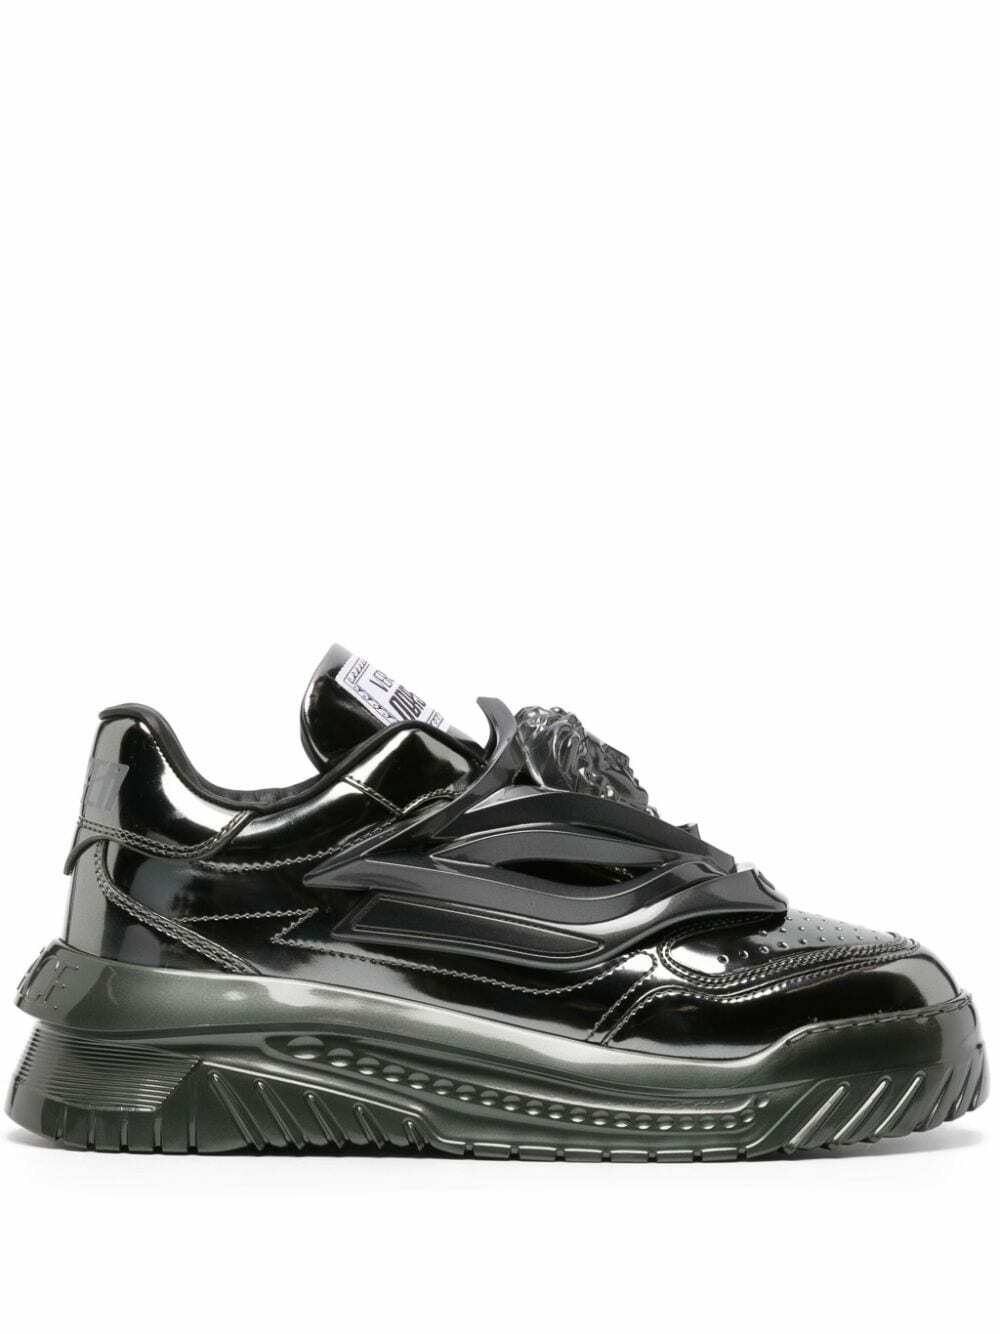 VERSACE - Odissea Laminated Leather Sneakers Versace